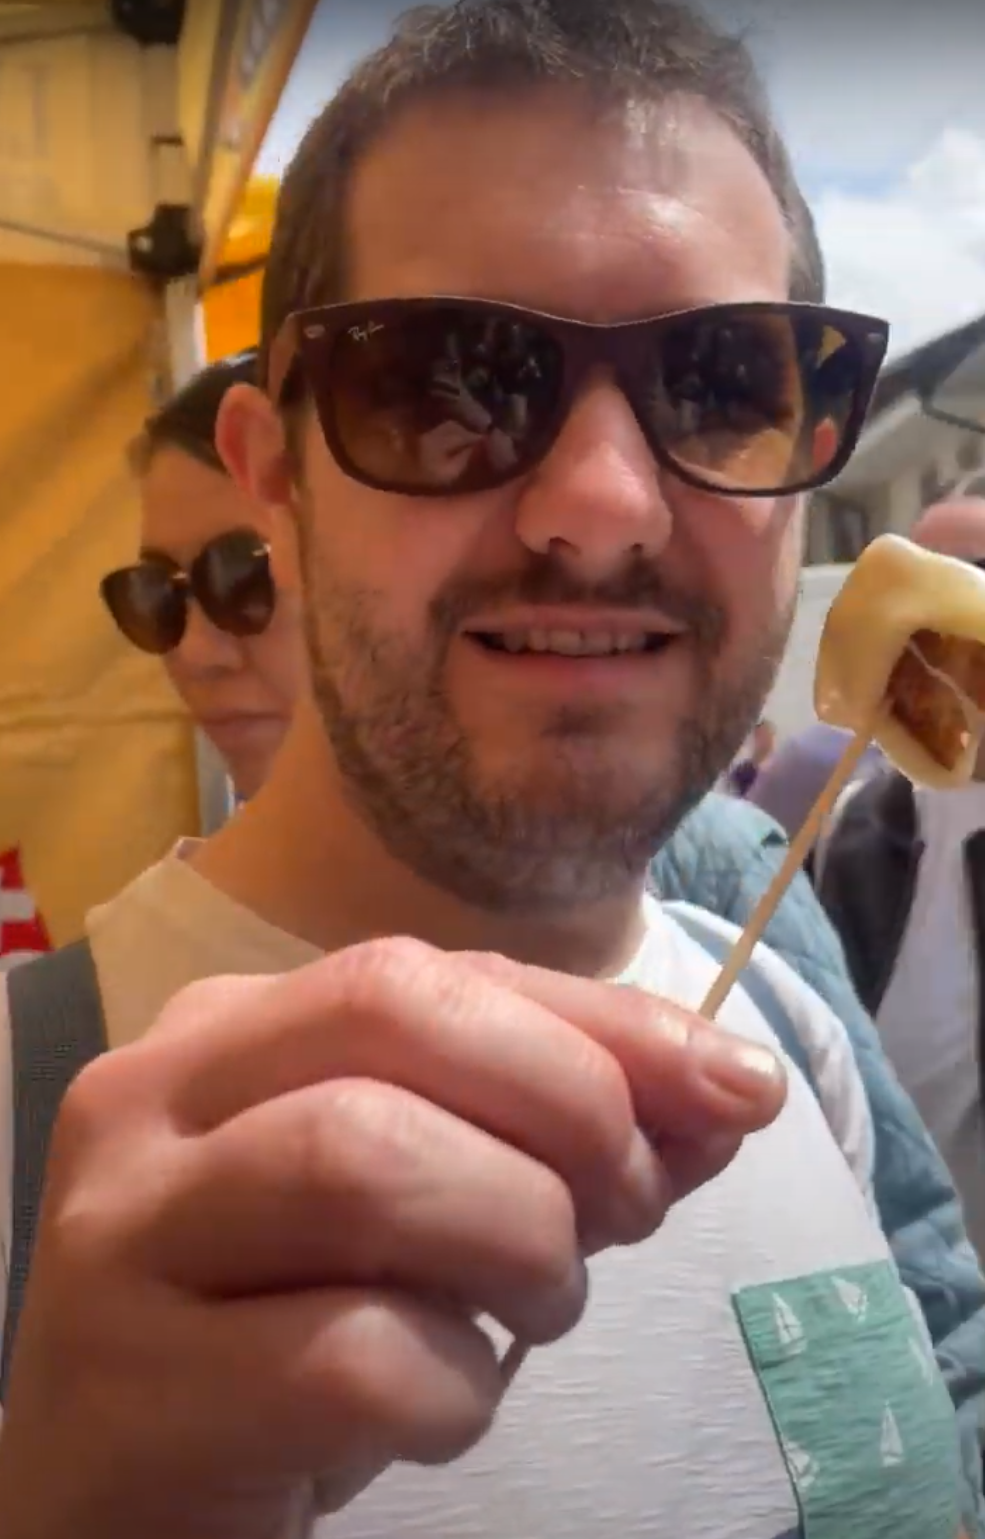 Karl wearing a sunglasses holds a stick with a bread covered in melted Gruyeres cheese